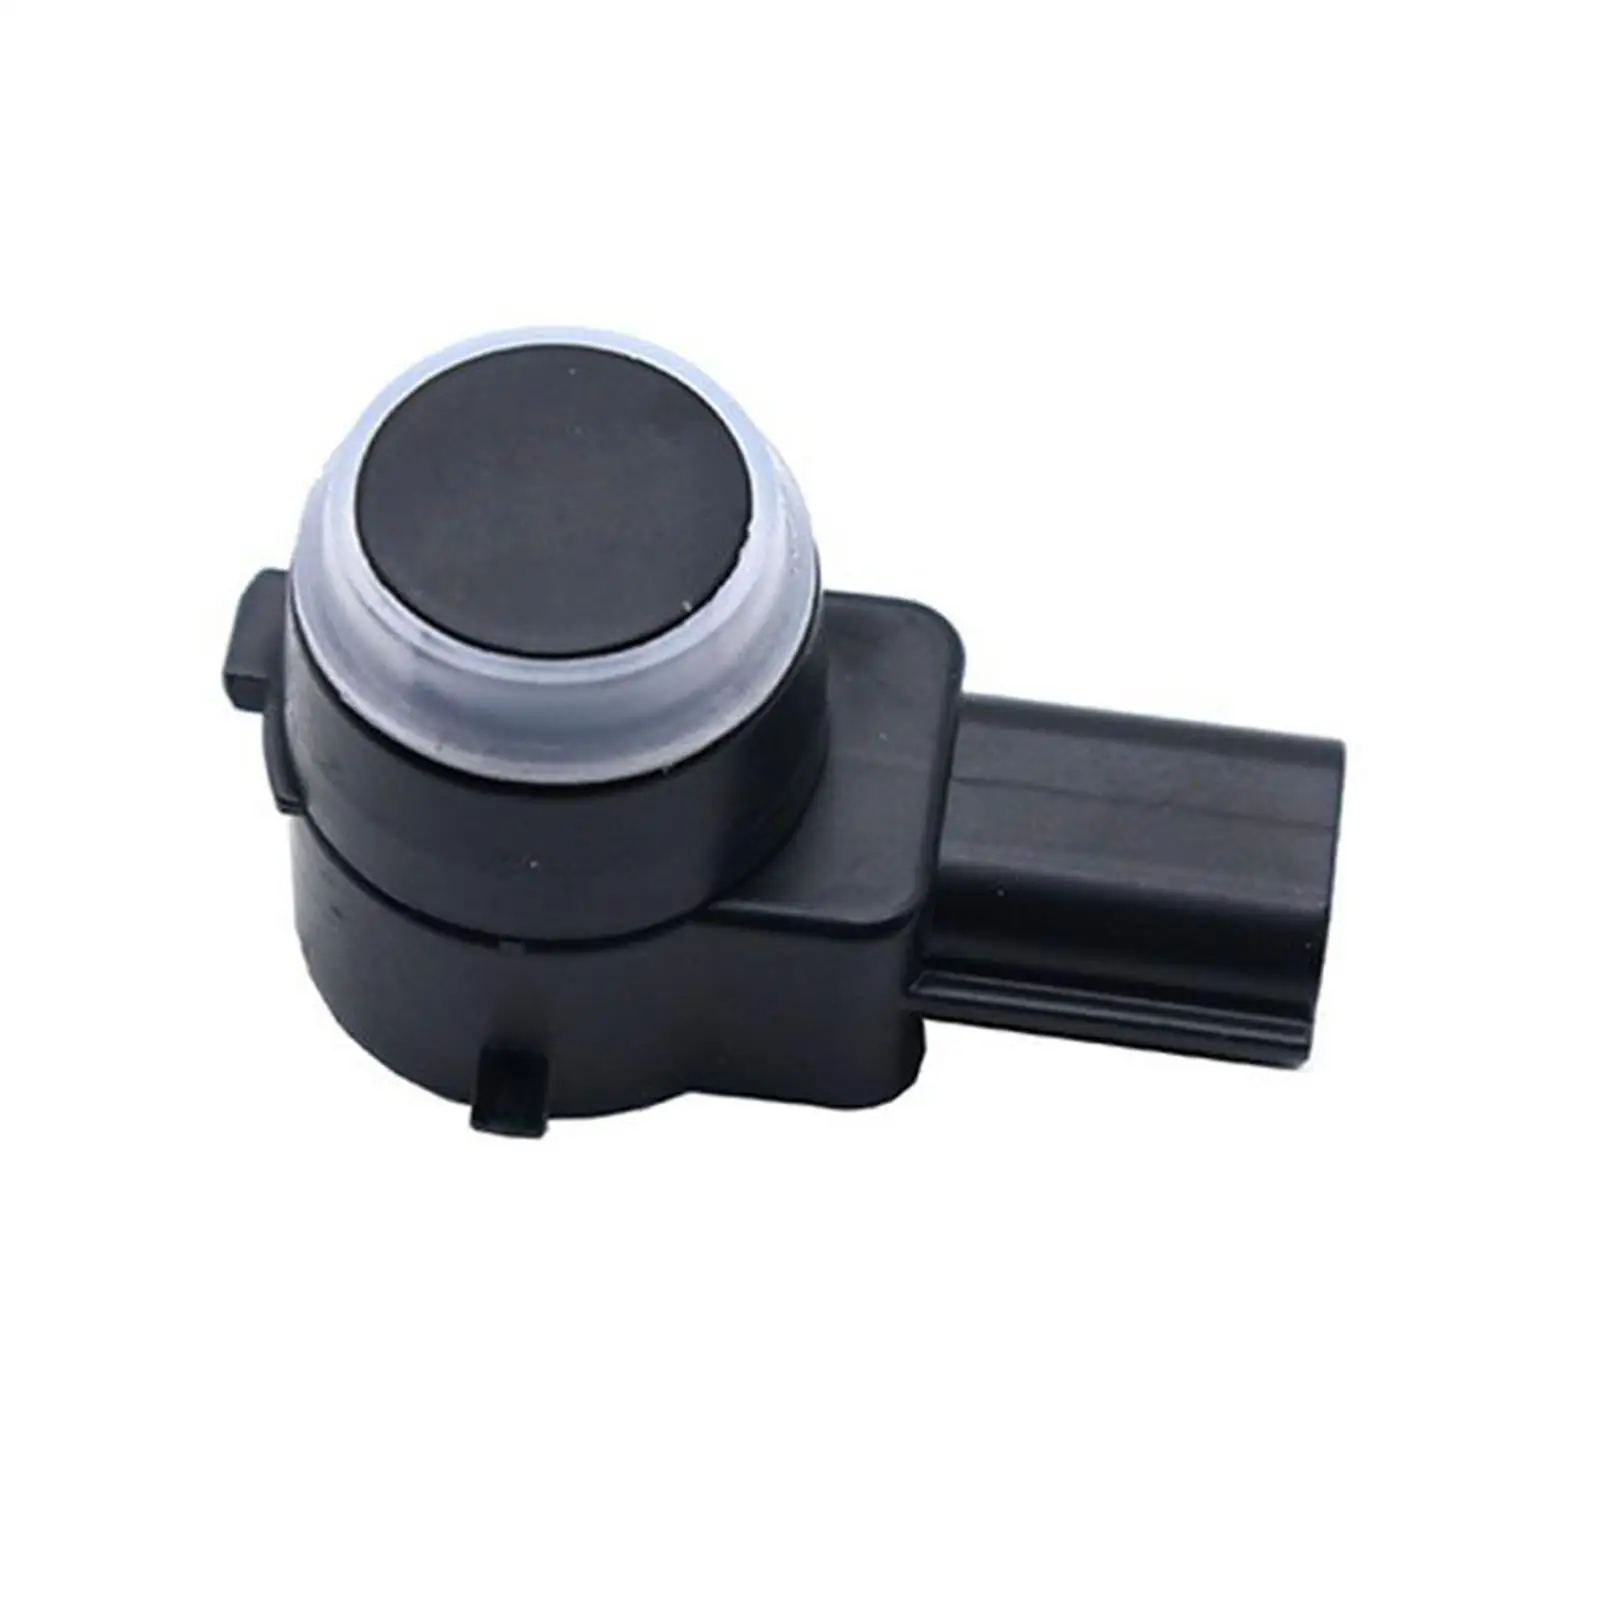 1014388-01-a Easy to Install Assembly Car PDC Parking Assist Sensor Replacement Car Ccessories for Tesla Model S 5yjs 2012